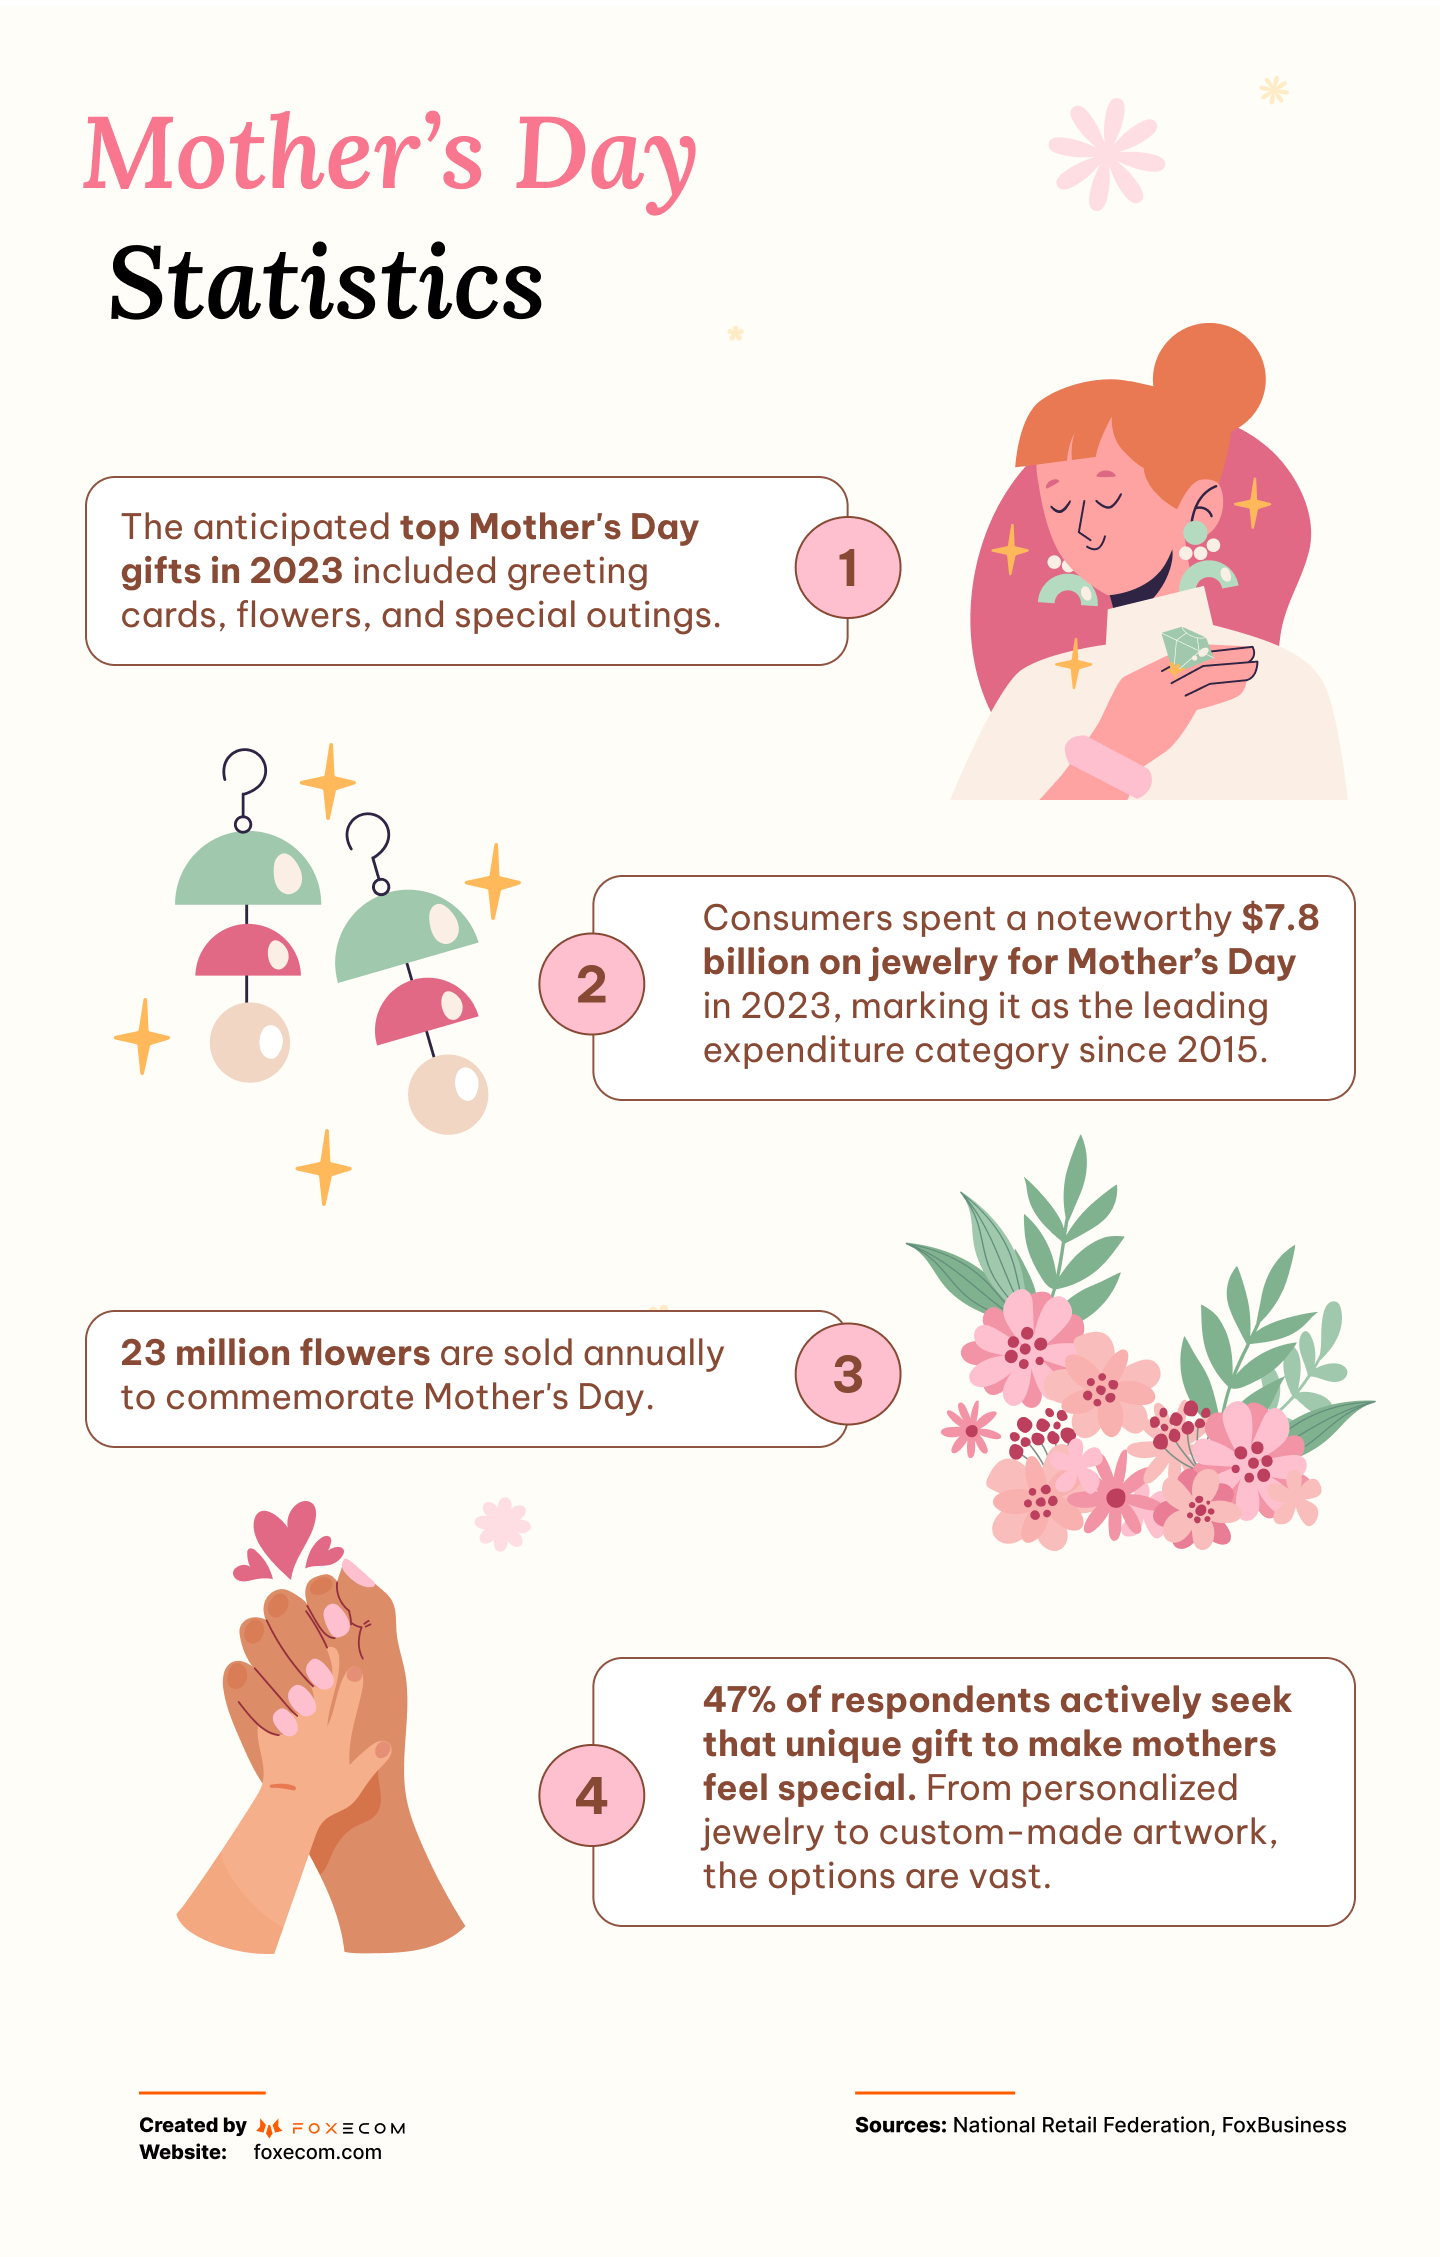 Mother's Day shopping trends and promotion marketing ideas